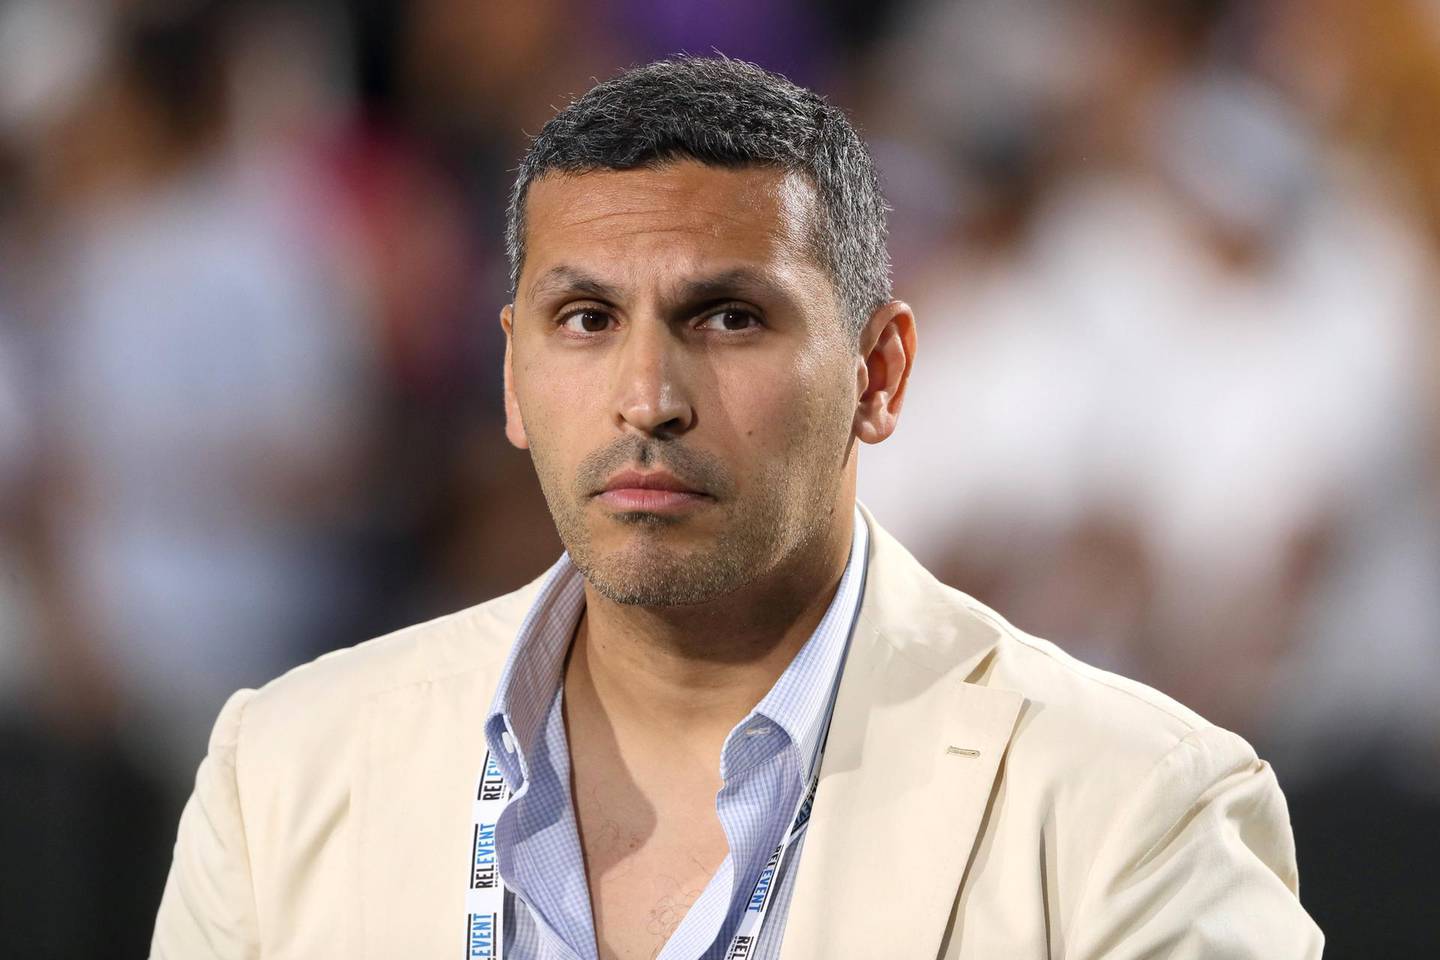 LOS ANGELES, CA - JULY 26: Manchester City Chairman Khaldoon Al Mubarak during the International Champions Cup 2017 match between Manchester City and Real Madrid at Los Angeles Memorial Coliseum on July 26, 2017 in Los Angeles, California. (Photo by Matthew Ashton - AMA/Getty Images)